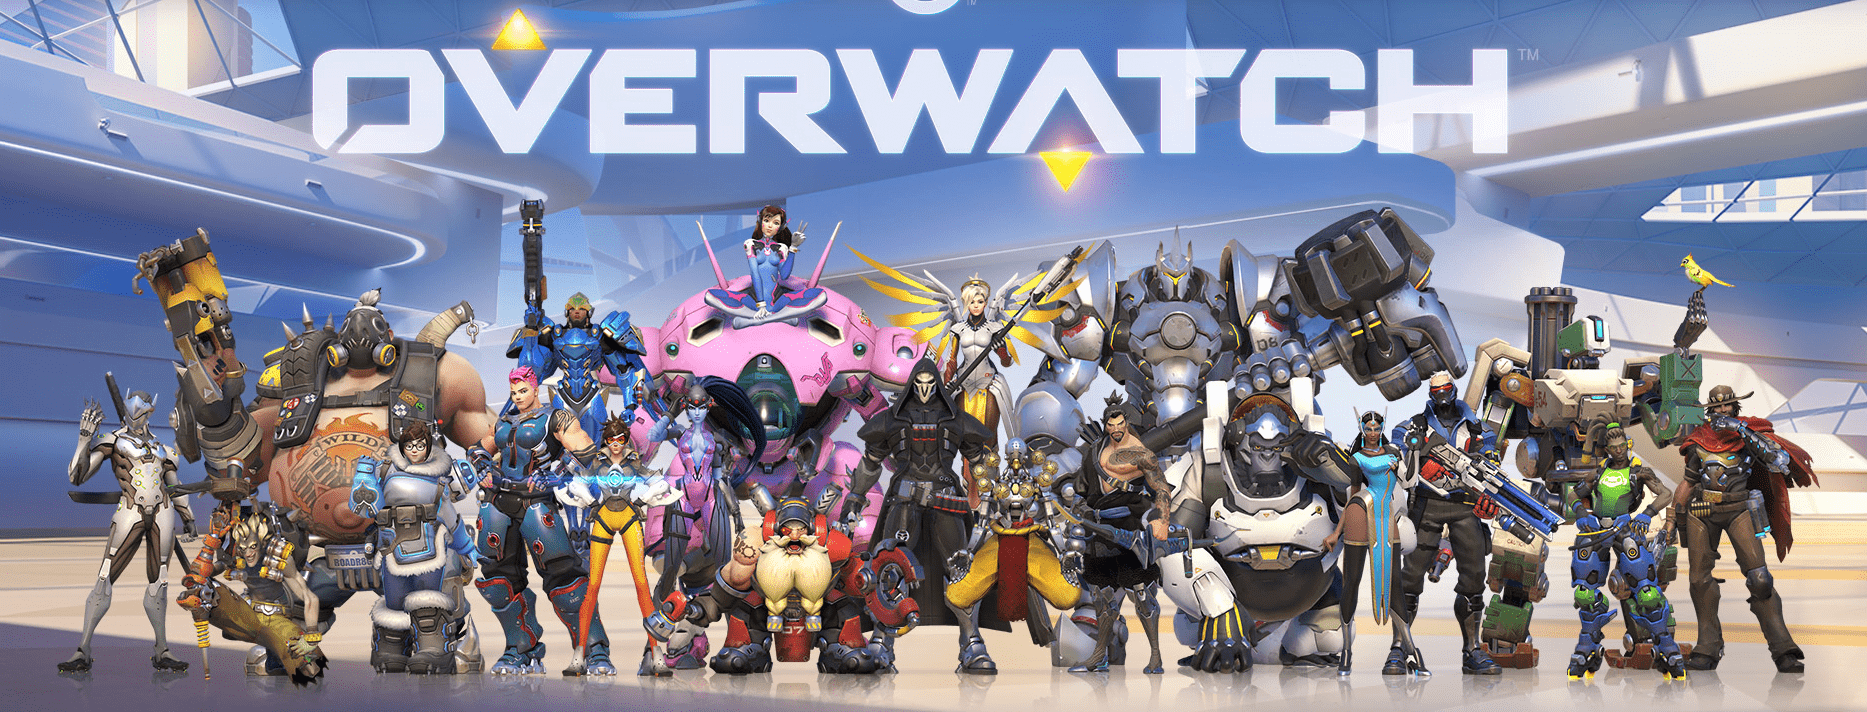 Overwatch Update Version 2.71 Full New Patch Notes PC Xbox One PS4 Full Details Here 2019